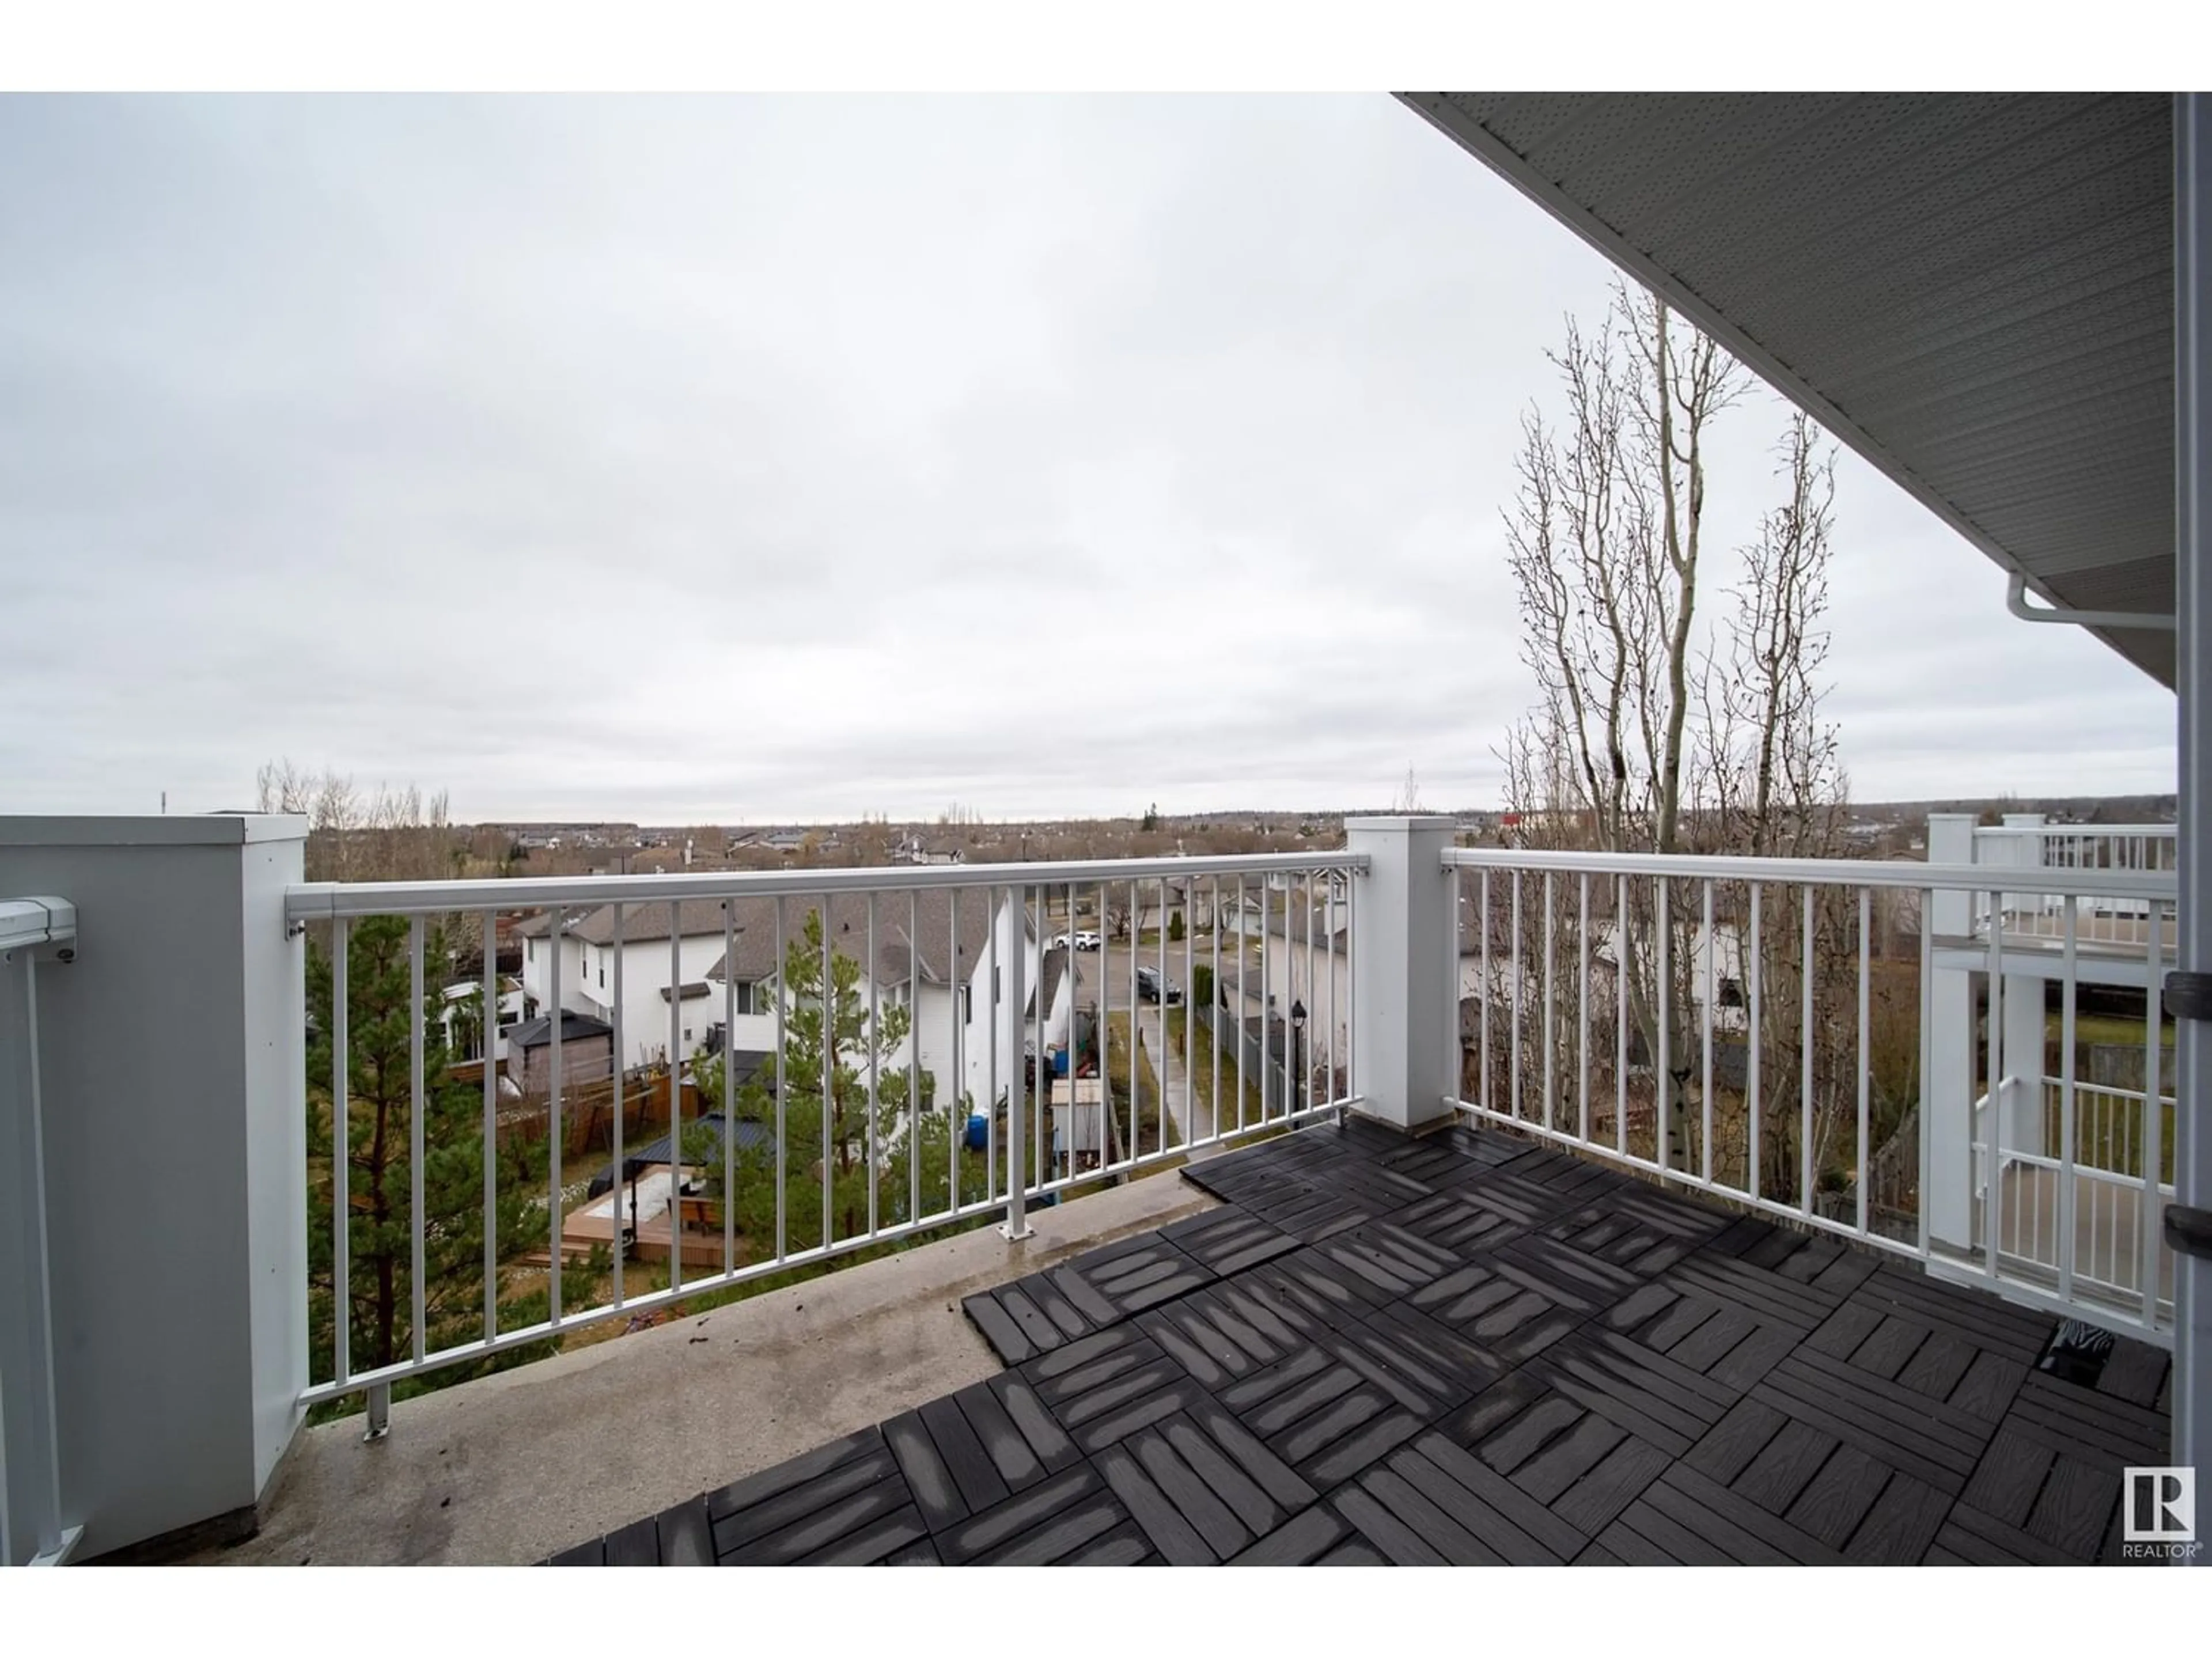 Balcony in the apartment for #421 5340 199 ST NW, Edmonton Alberta T6M0A5